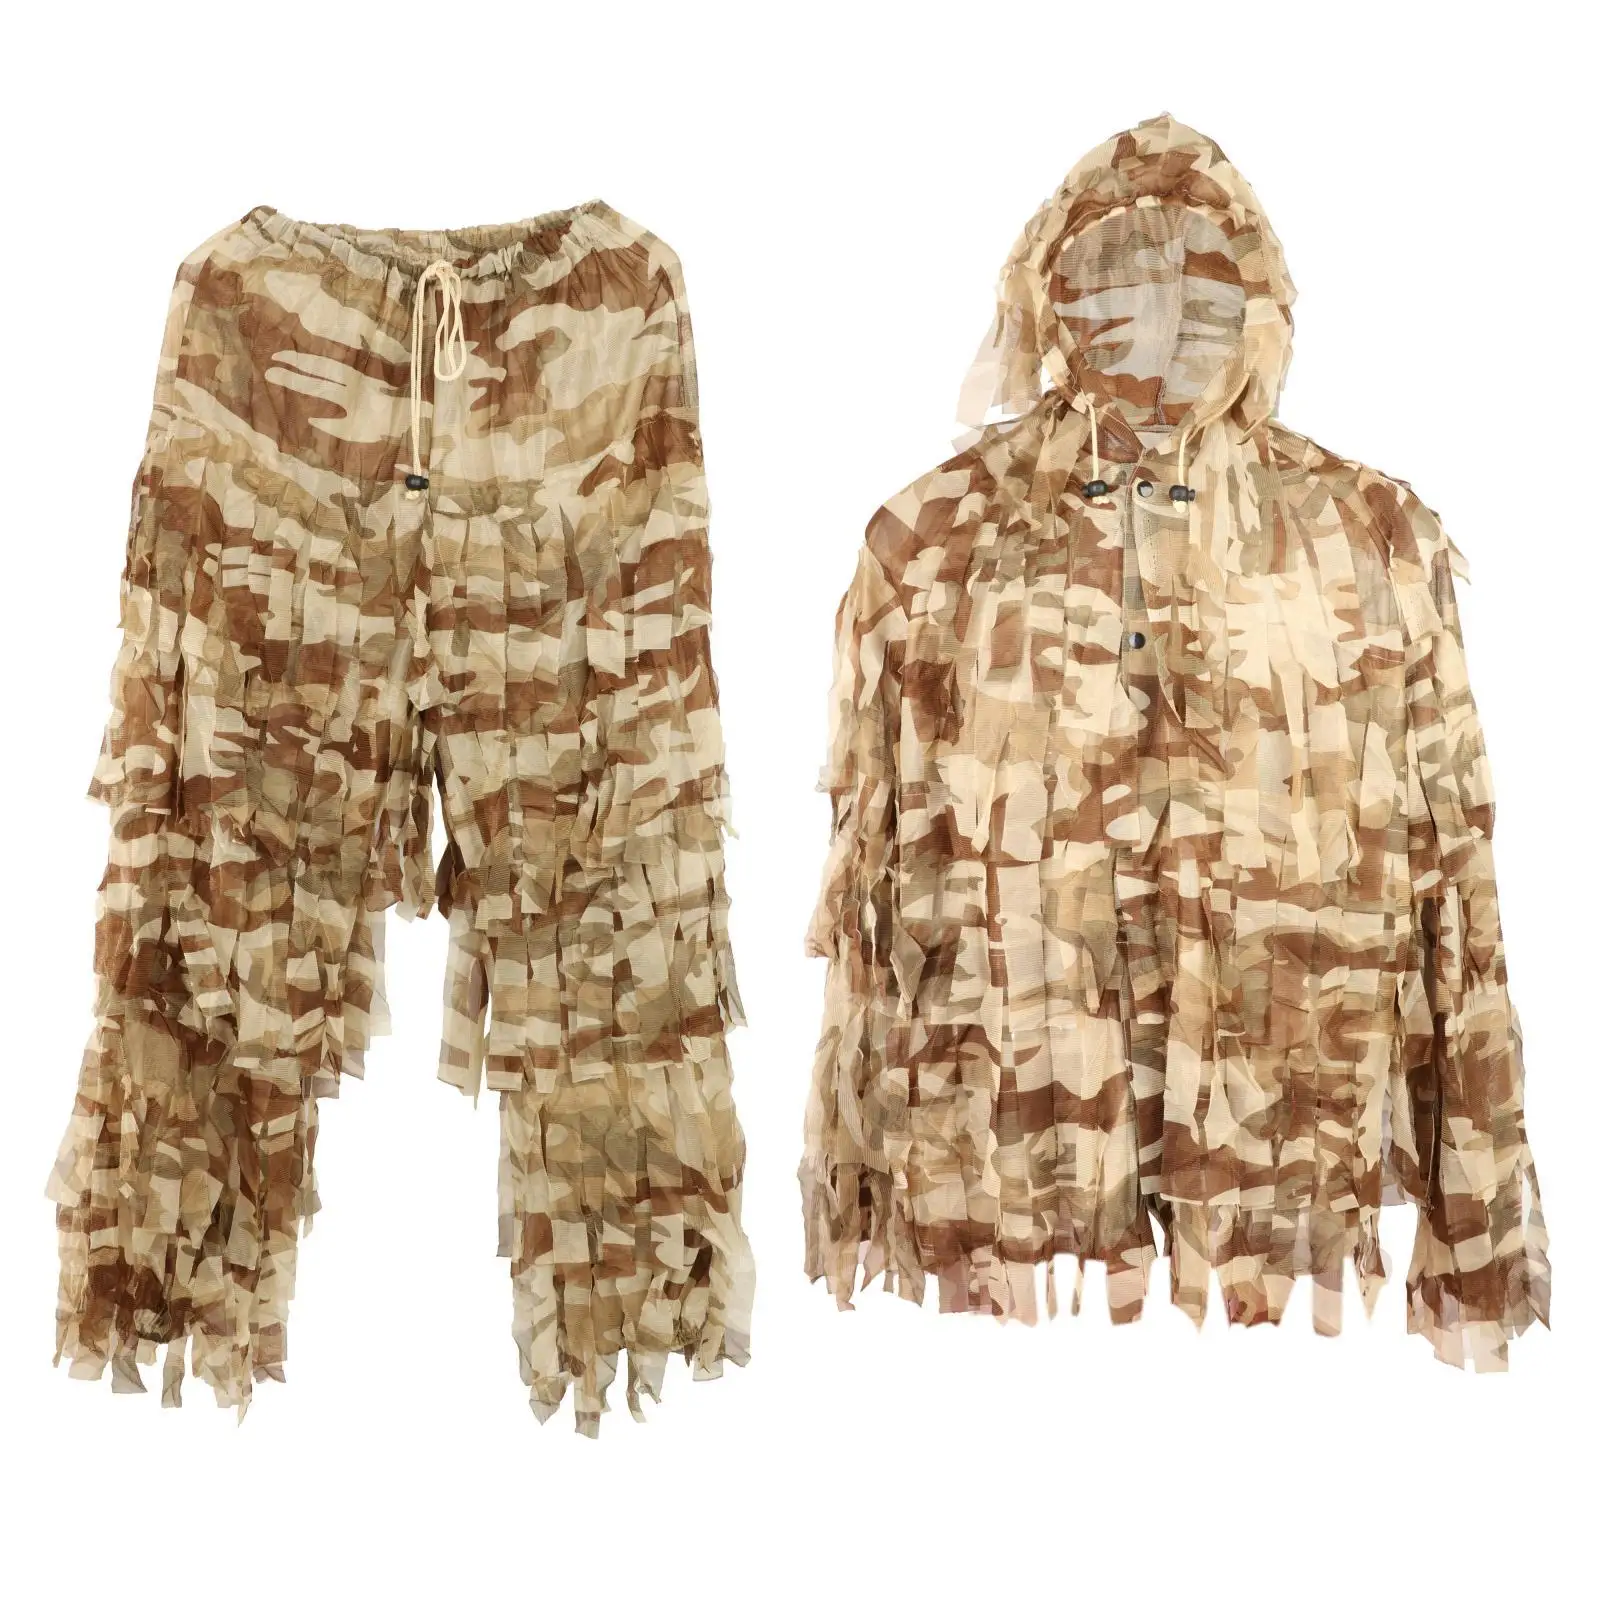 3D Camo Suits Ghillie Suits Woodland  Clothing   Clothes and Pants for Jungle Hunting, 